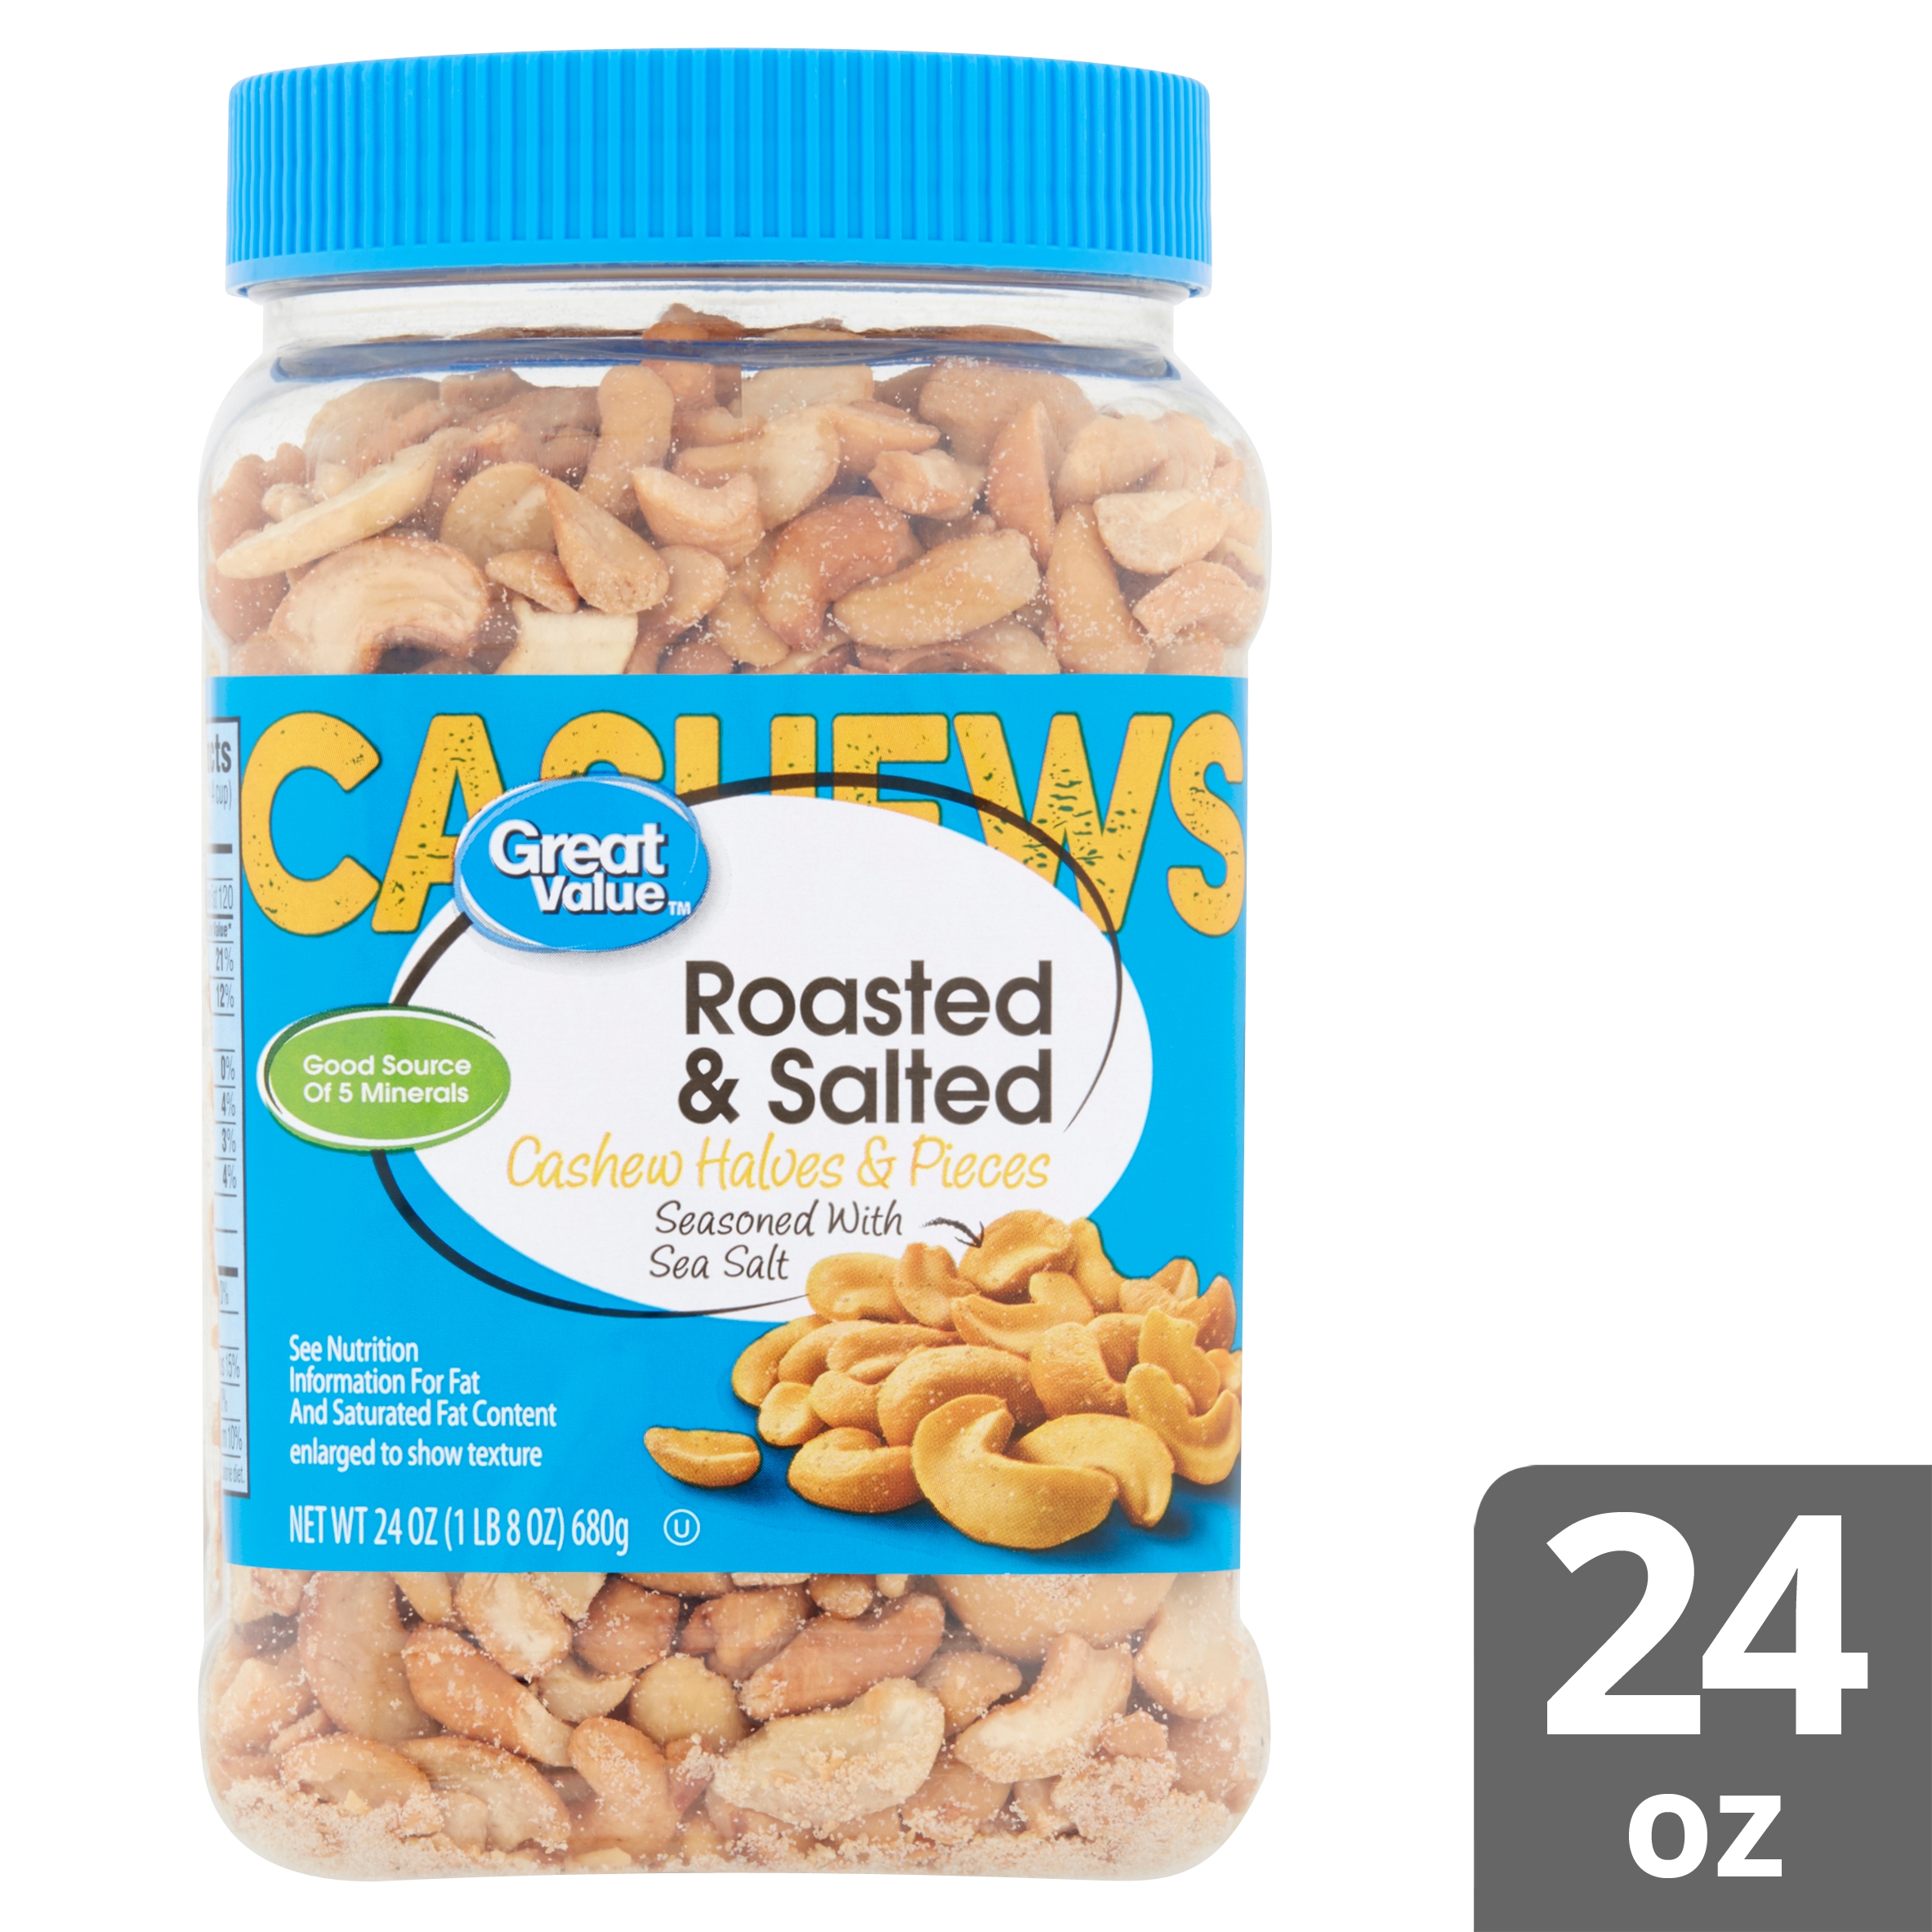 Great Value Roasted & Salted Cashew Halves & Pieces, 24 Oz Image